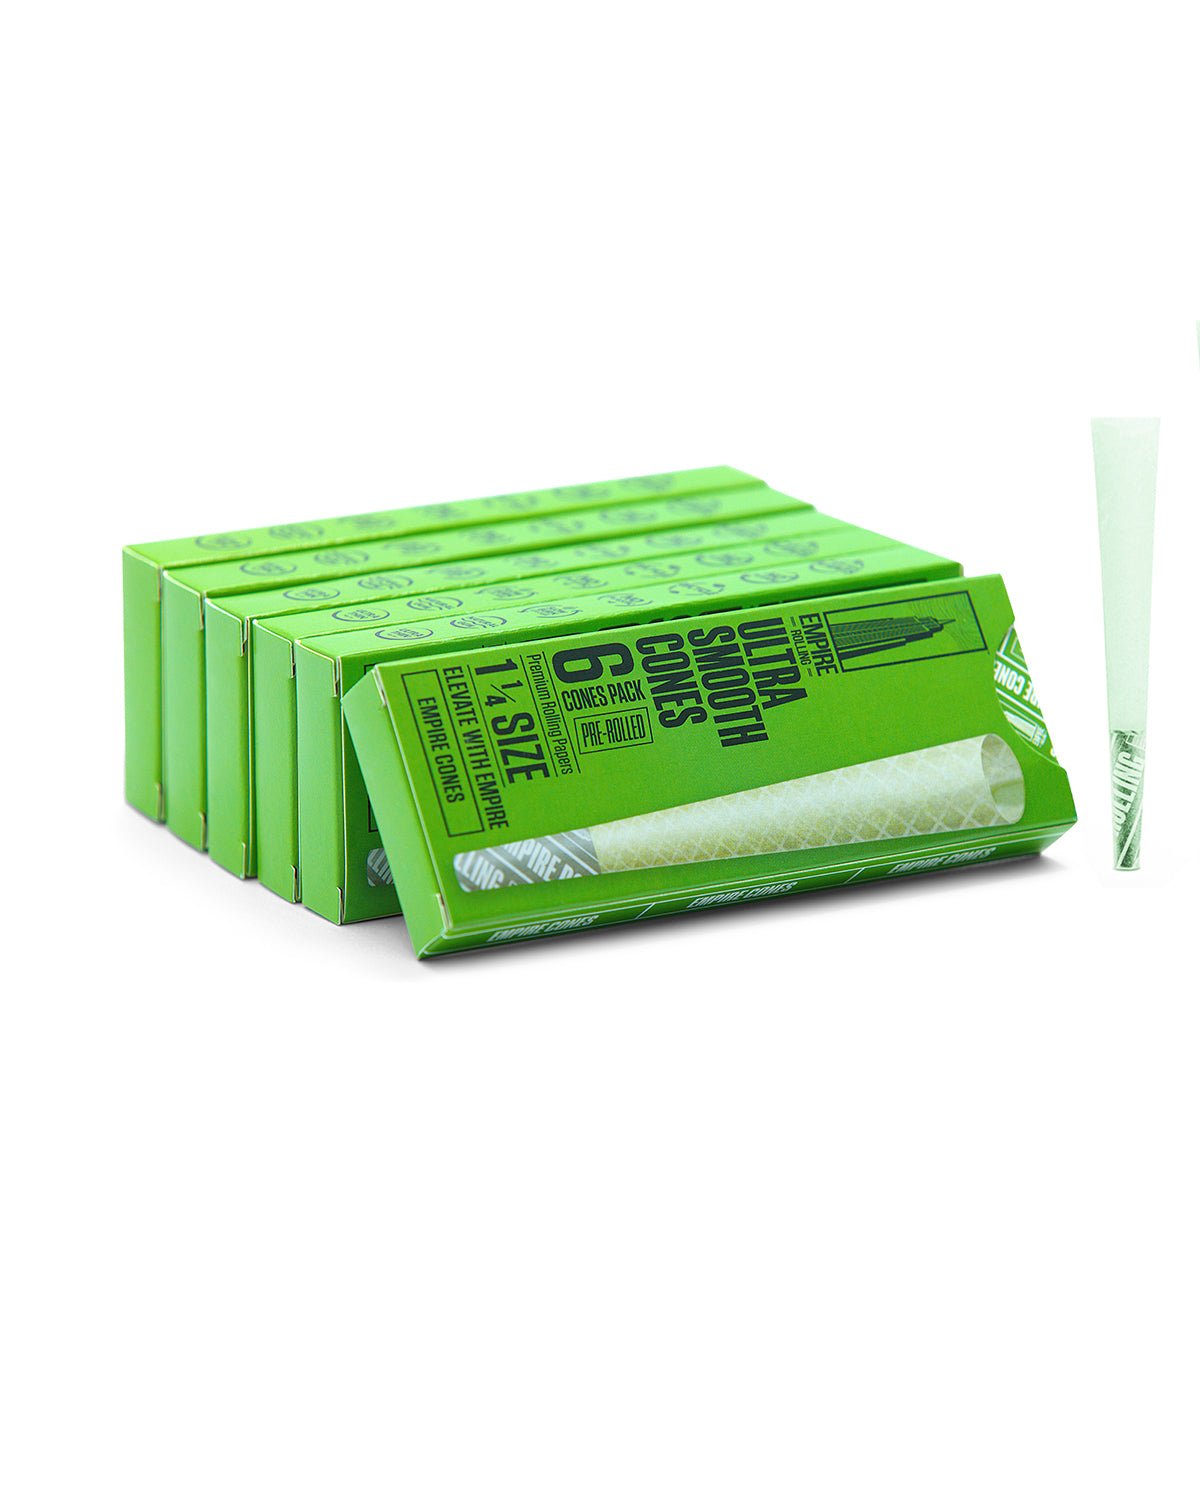 Empire Rolling's King Size Organic Hemp Rolling Papers, eco-friendly and crafted with high-quality, natural materials for a premium smoking experience.UltraSmooth Green 1.25 Size 6-Count - Empire Rolling Papers